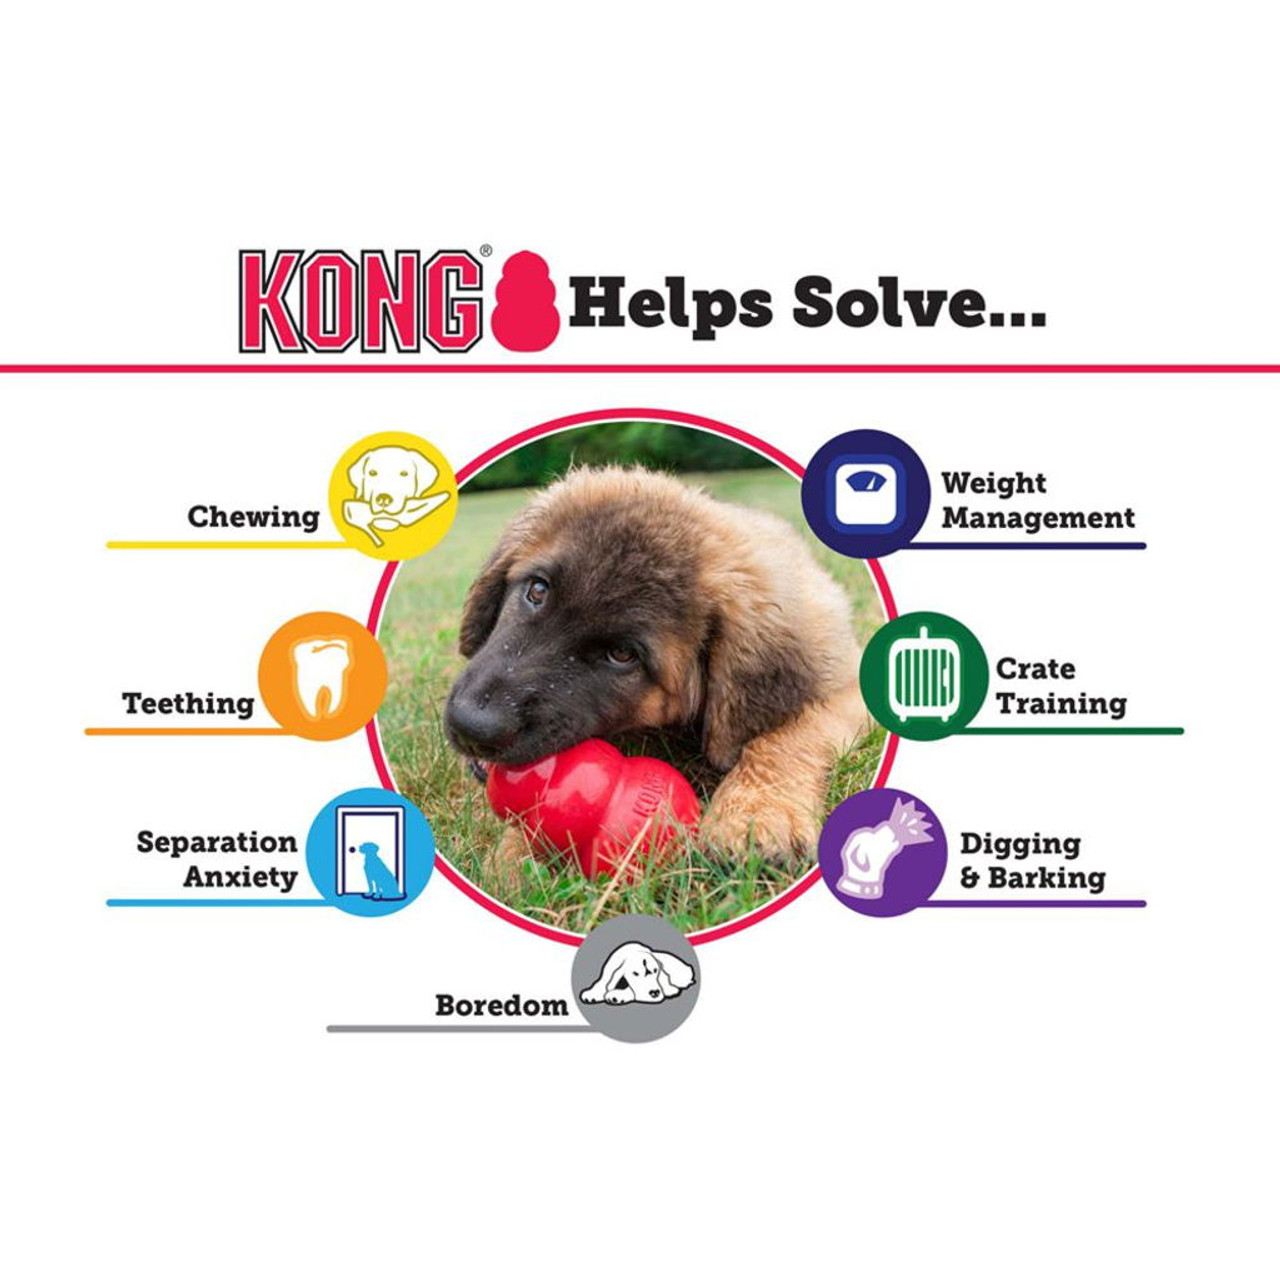 KONG® Classic Small Red Dog Toy, 1 ct - Kroger